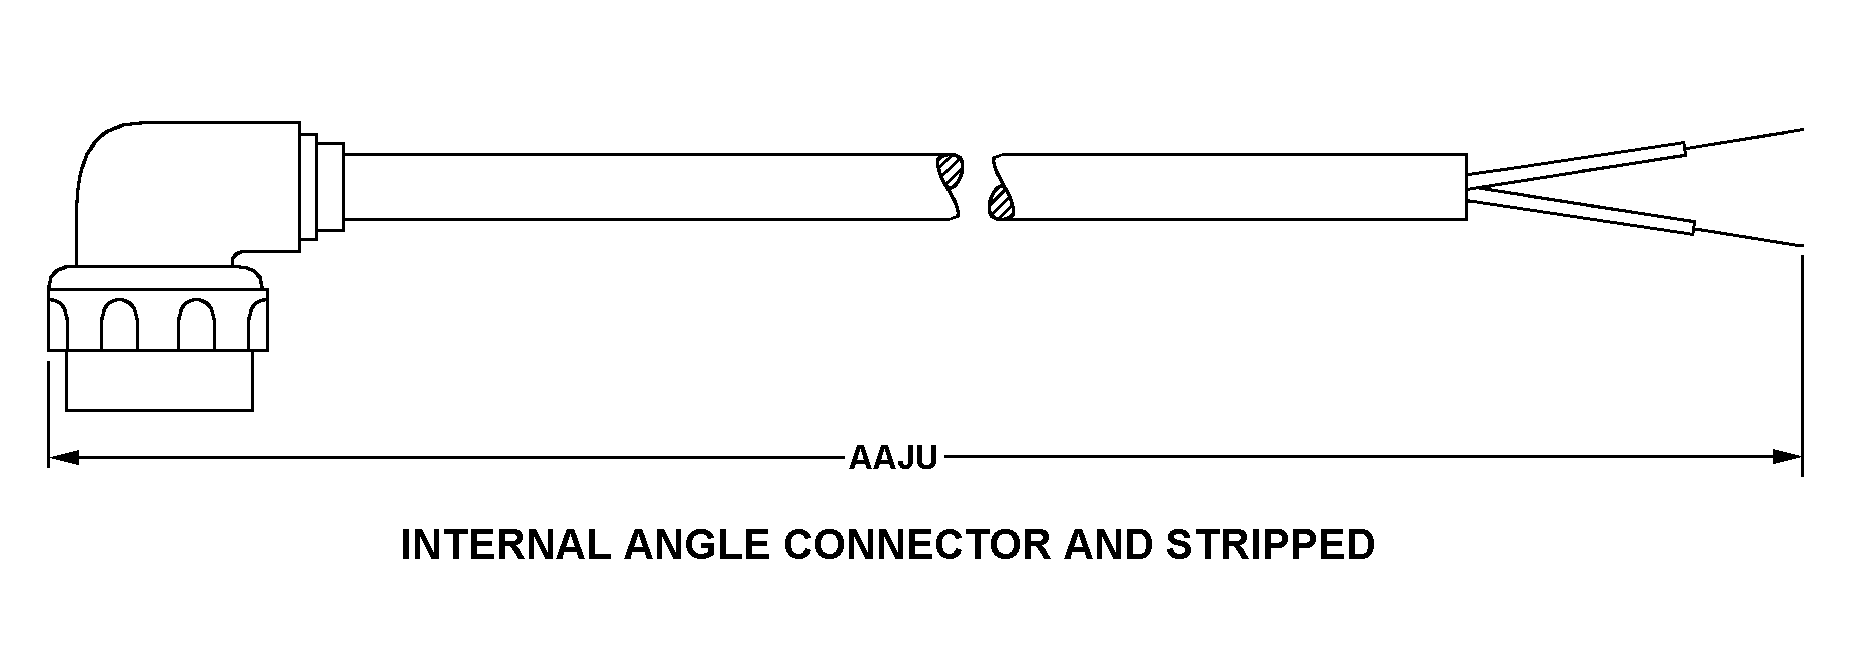 INTERNAL ANGLE CONNECTOR AND STRIPPED style nsn 5995-01-399-8146